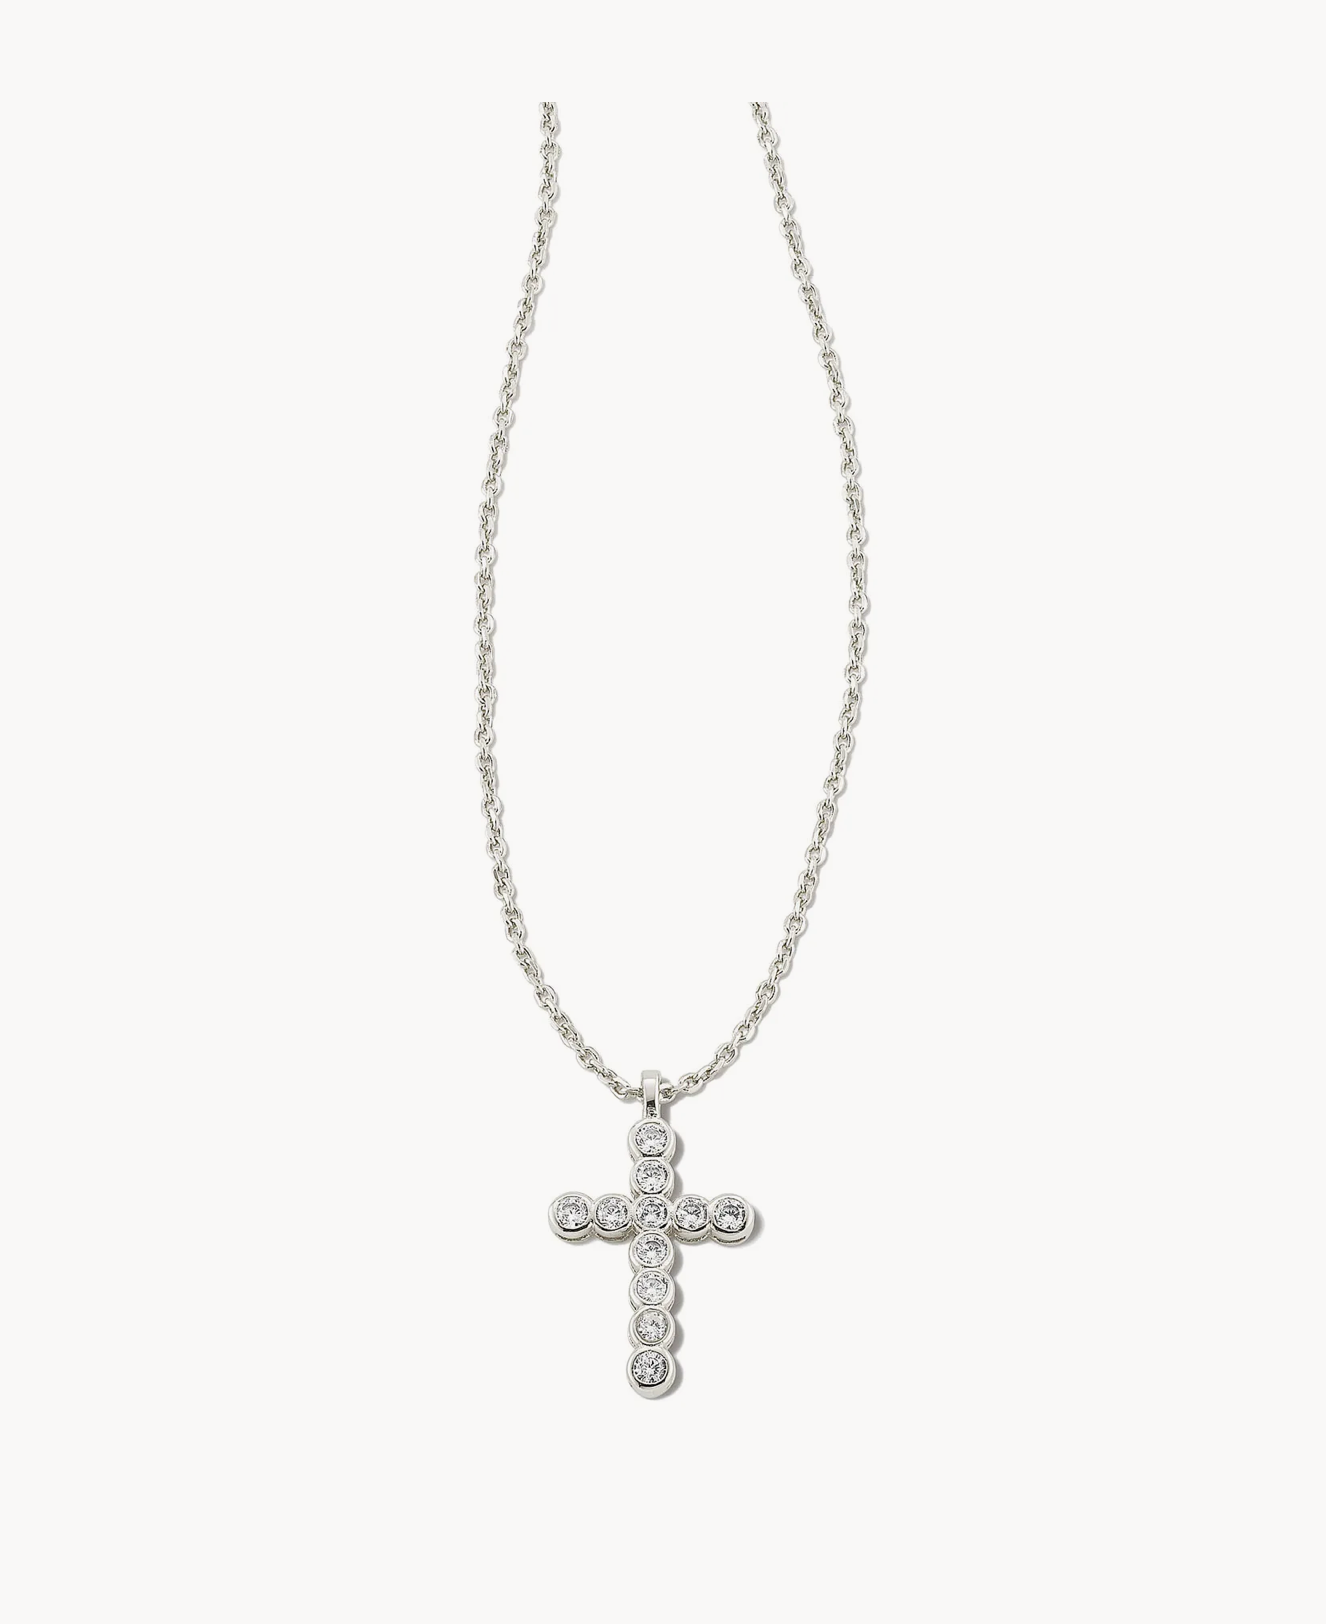 Cross Crystal Pendant White Rhod Necklace